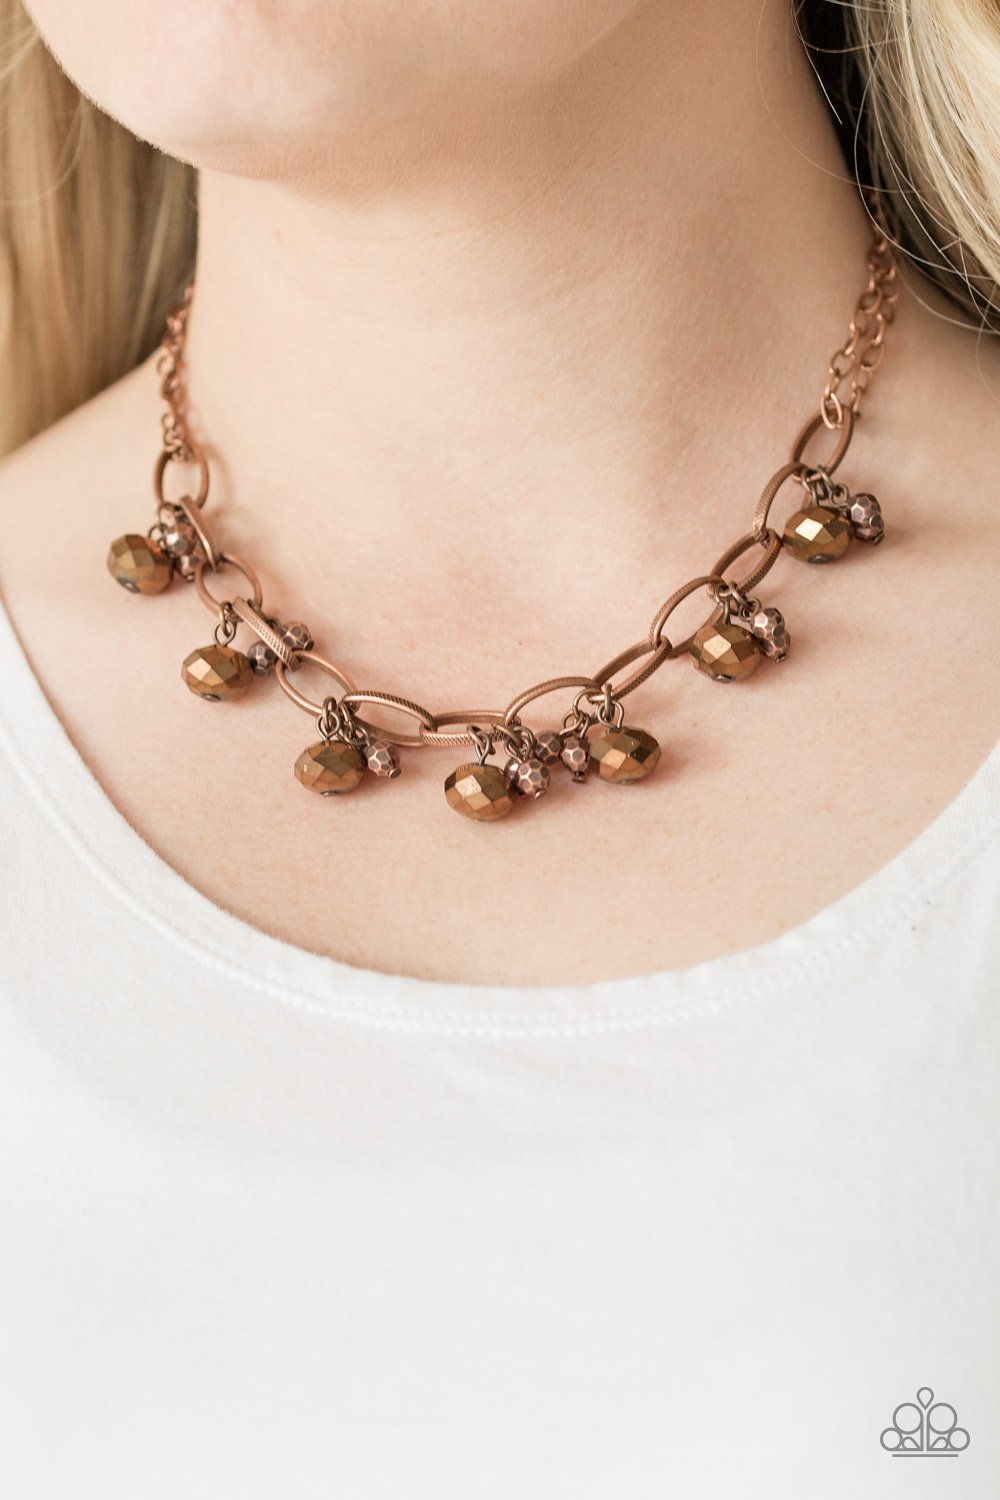 Lets Get This FASHION Show On The Road - Copper necklace